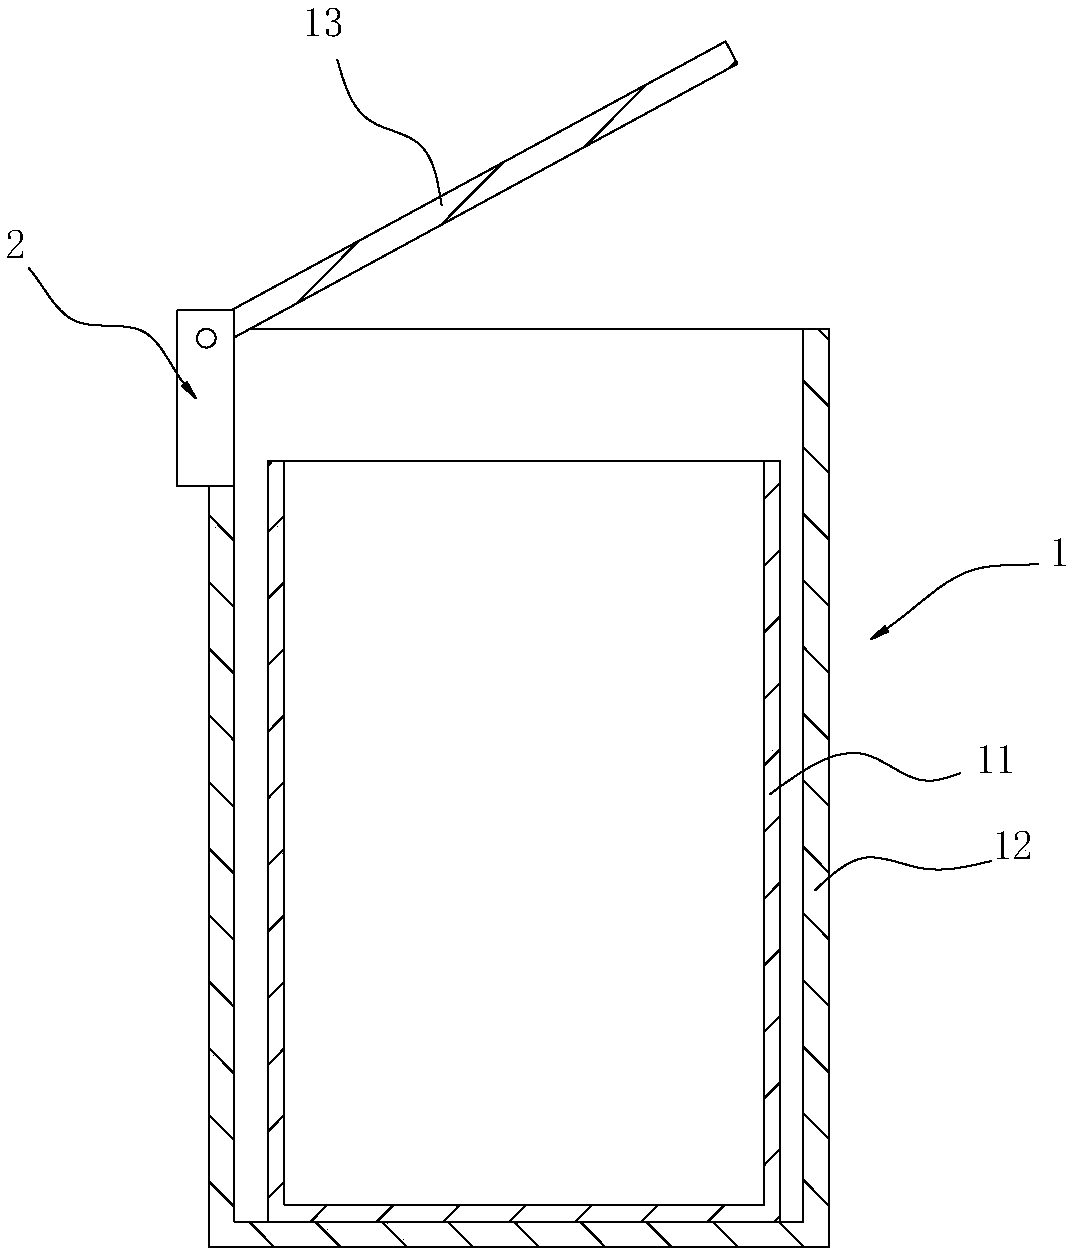 Intelligent garbage can control system and method